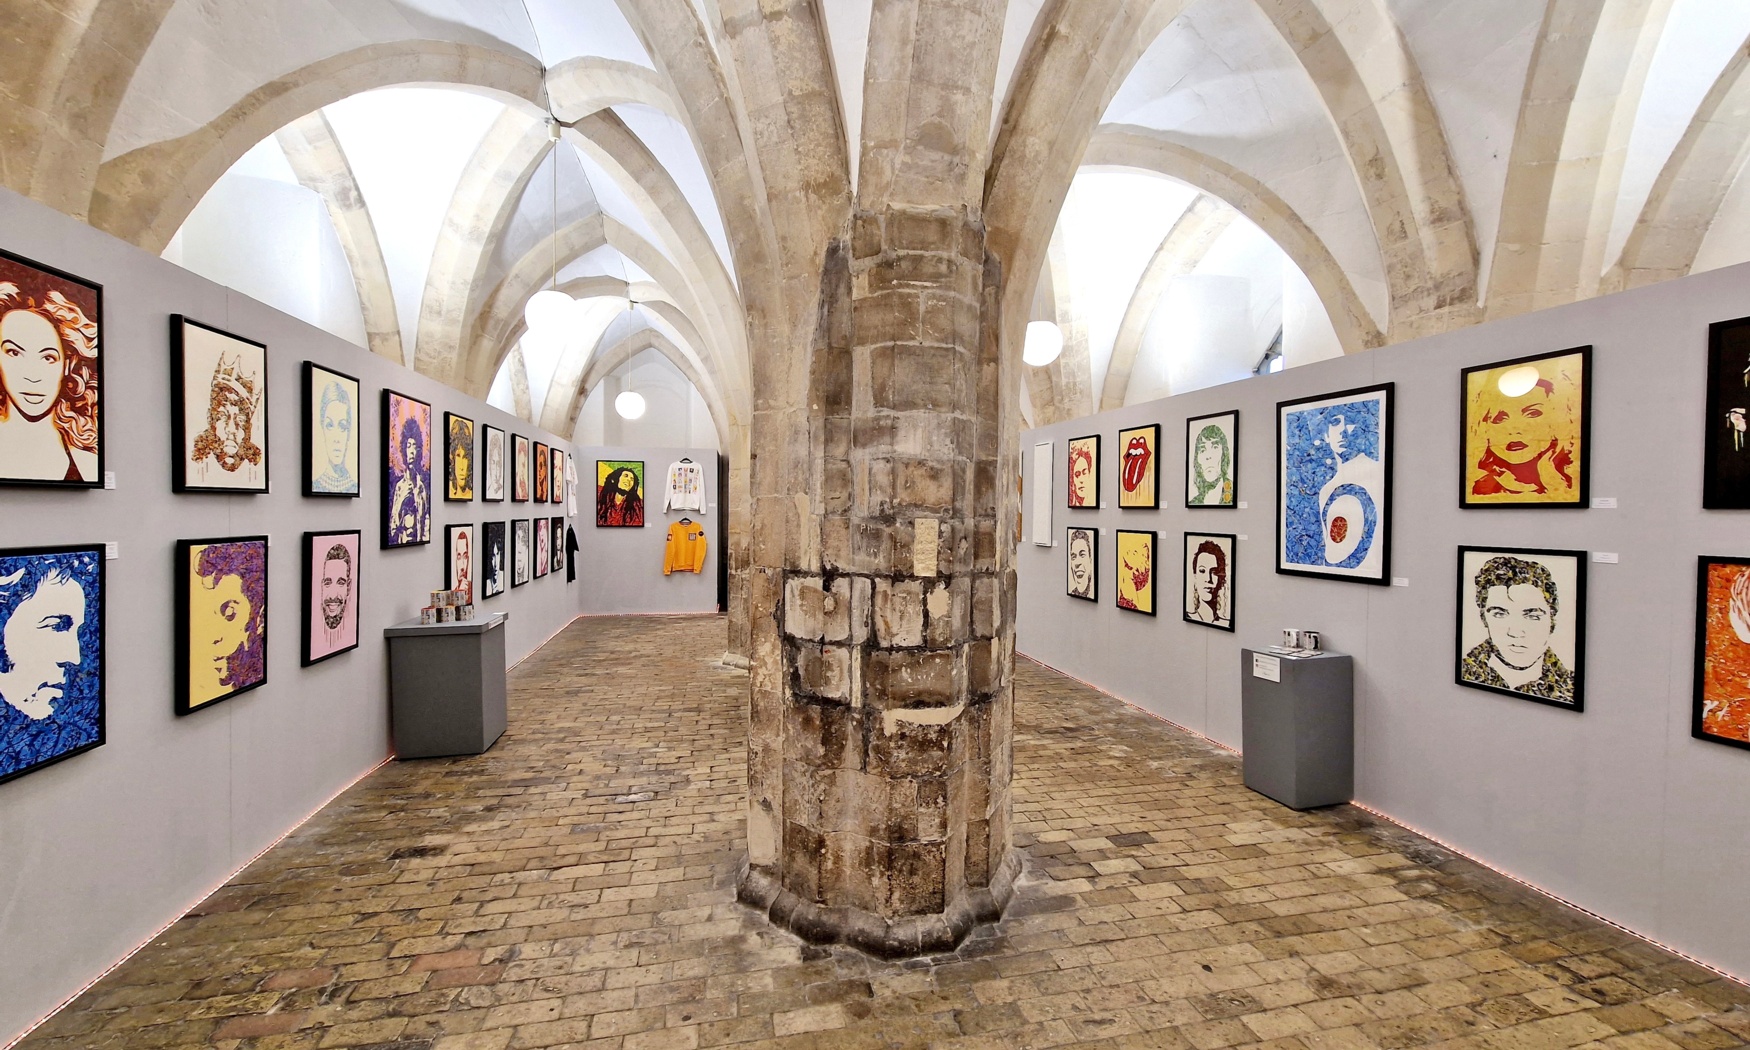 UK artist Kerwin Blackburn exhibiting his music themed, Jackson Pollock-inspired pop art paintings and prints in Norwich School's Crypt Gallery in 2022 | By Kerwin